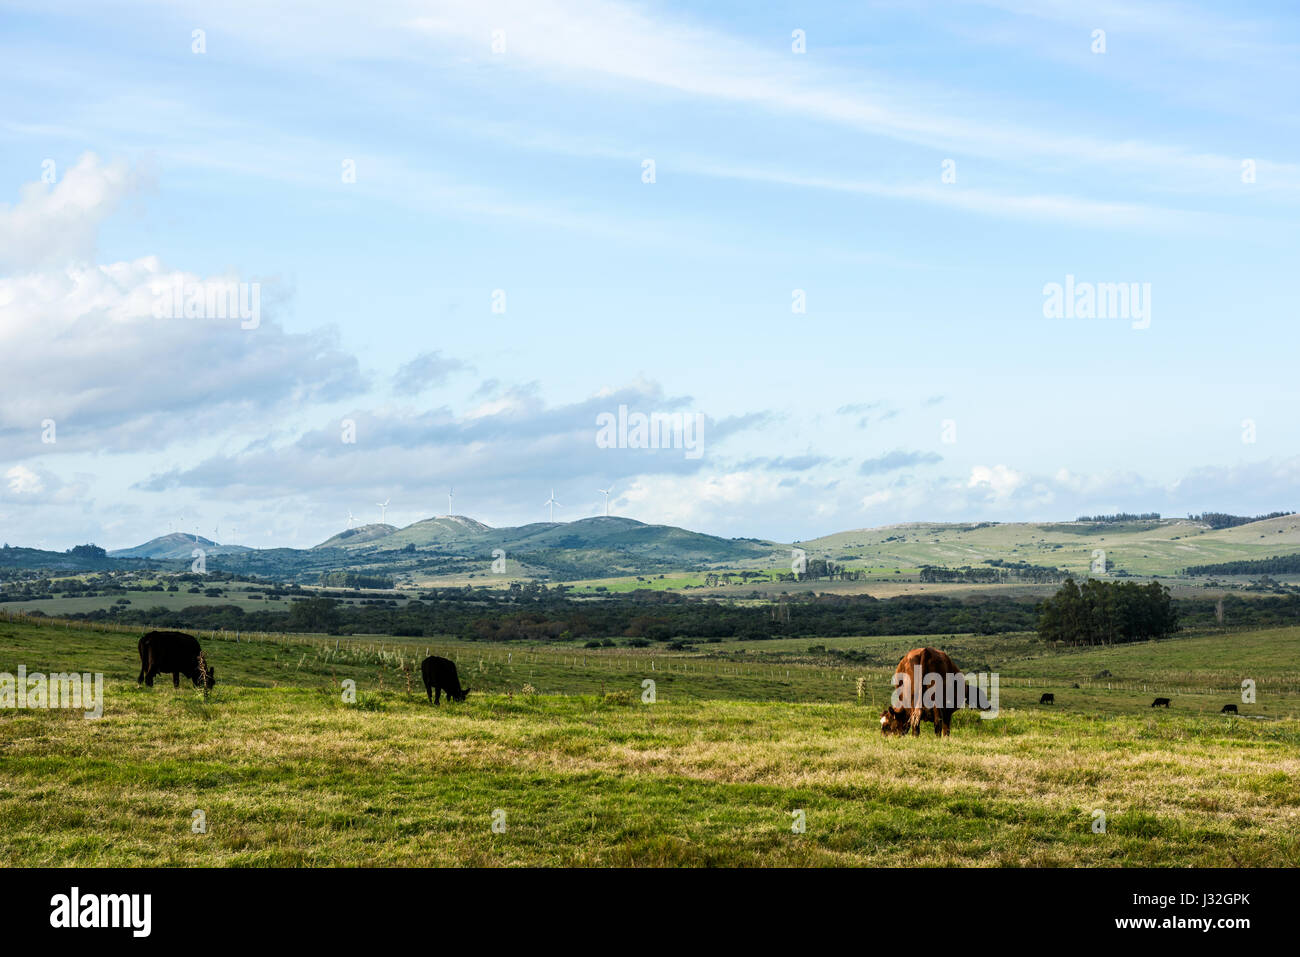 Classic view countryside in Maldonado Department of Uruguay: Cows, meadows and green technologies Stock Photo